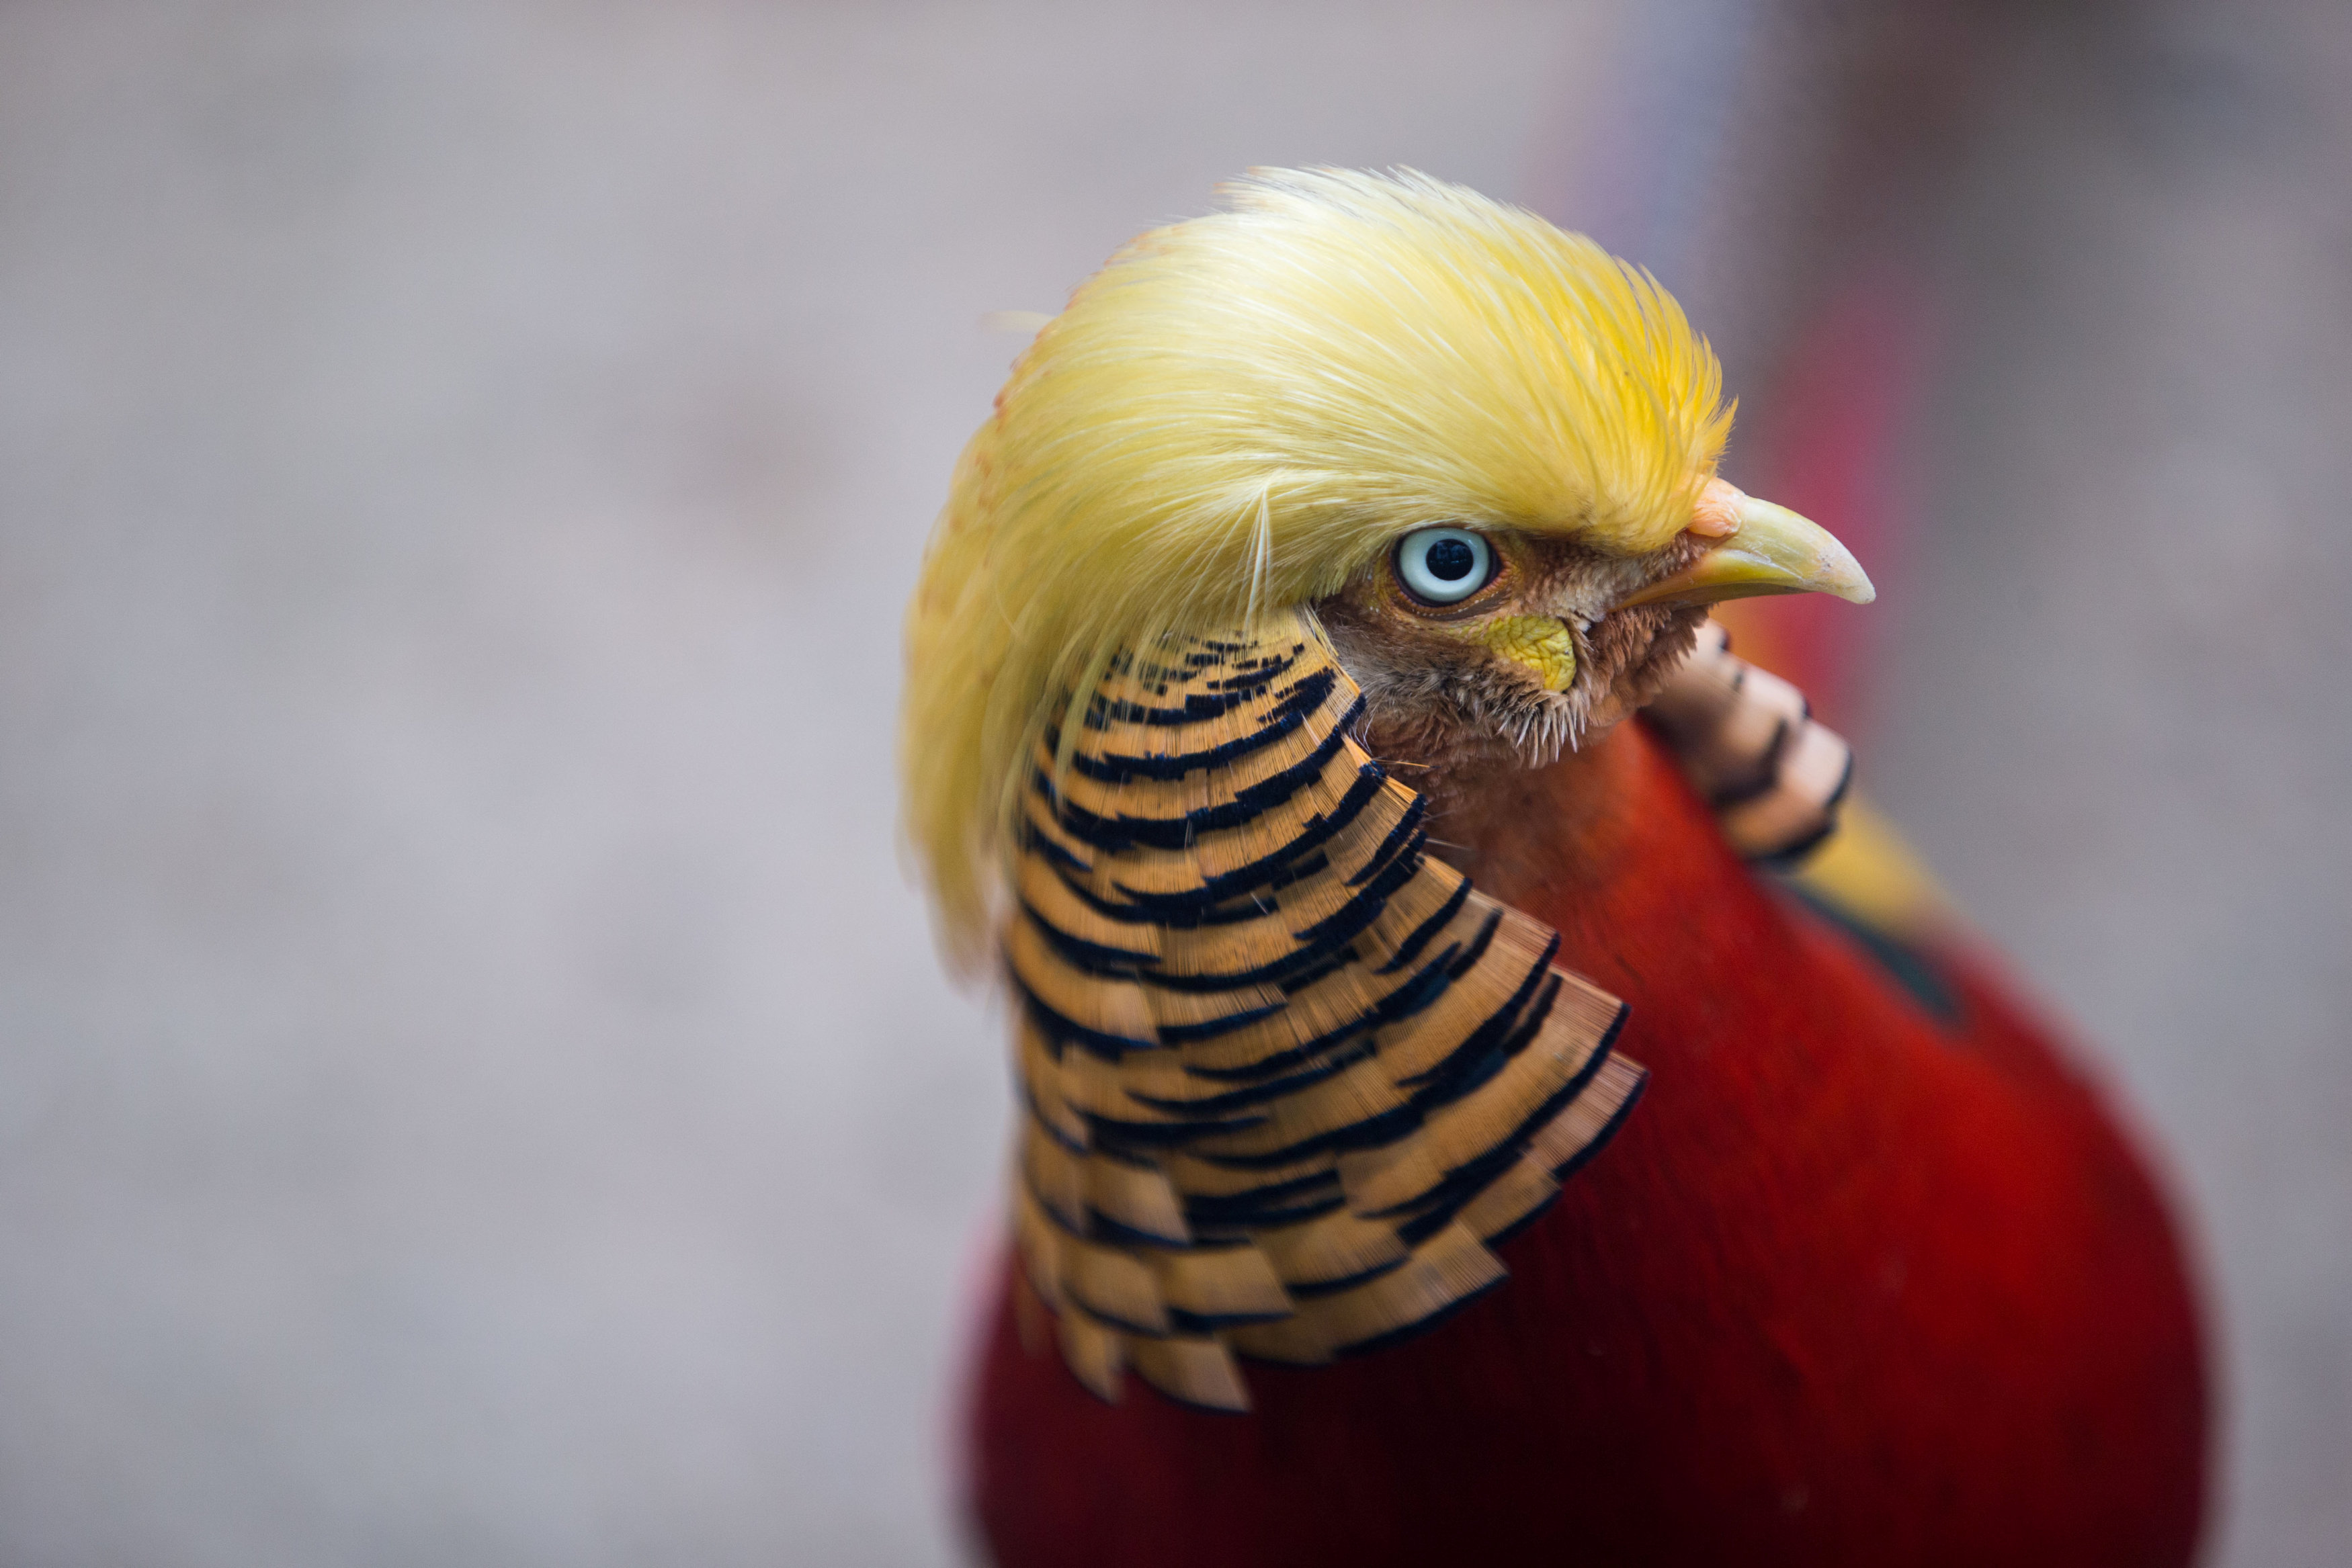 A golden pheasant is seen at Hangzhou Safari Park in Hangzhou, Zhejiang Province, China, November 13, 2016. According to local media, the pheasant gains popularity as its golden feathers resemble the hairstyle of U.S. President-elect Donald Trump. Picture